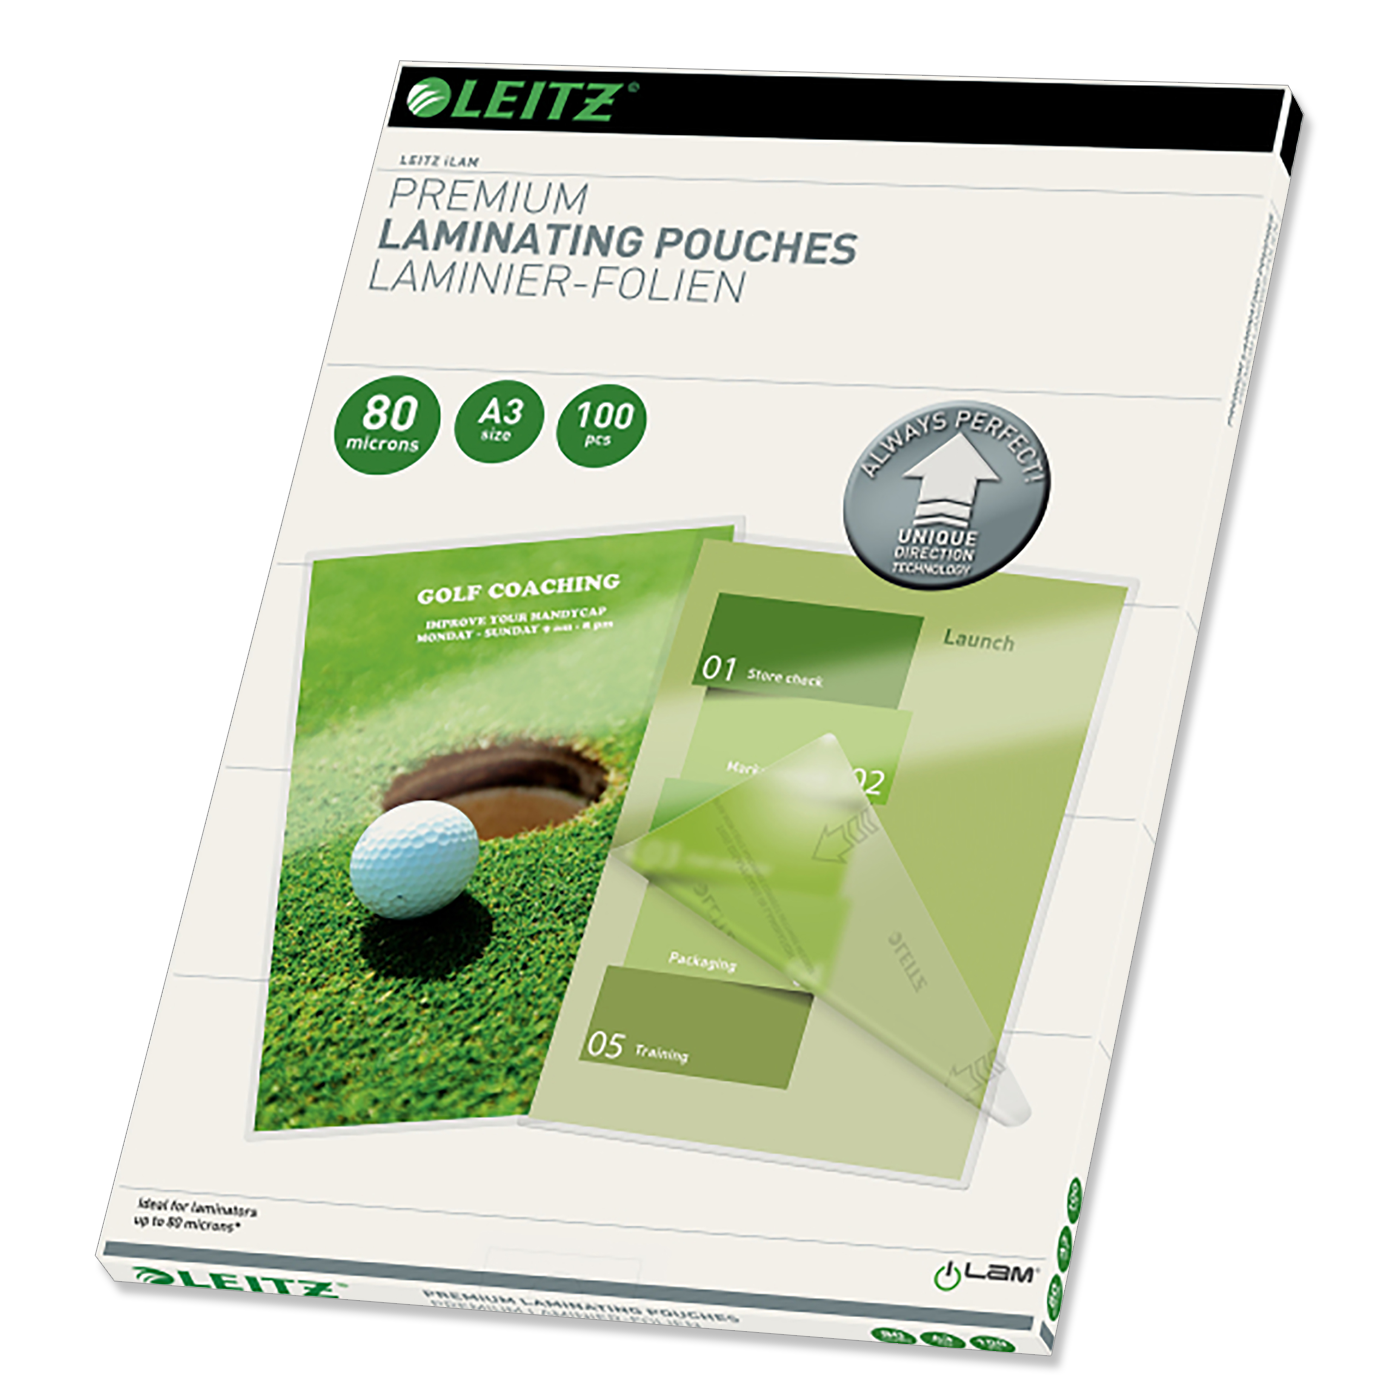 Leitz Laminating Pouch Premium A3 80 Micron Pack of 100